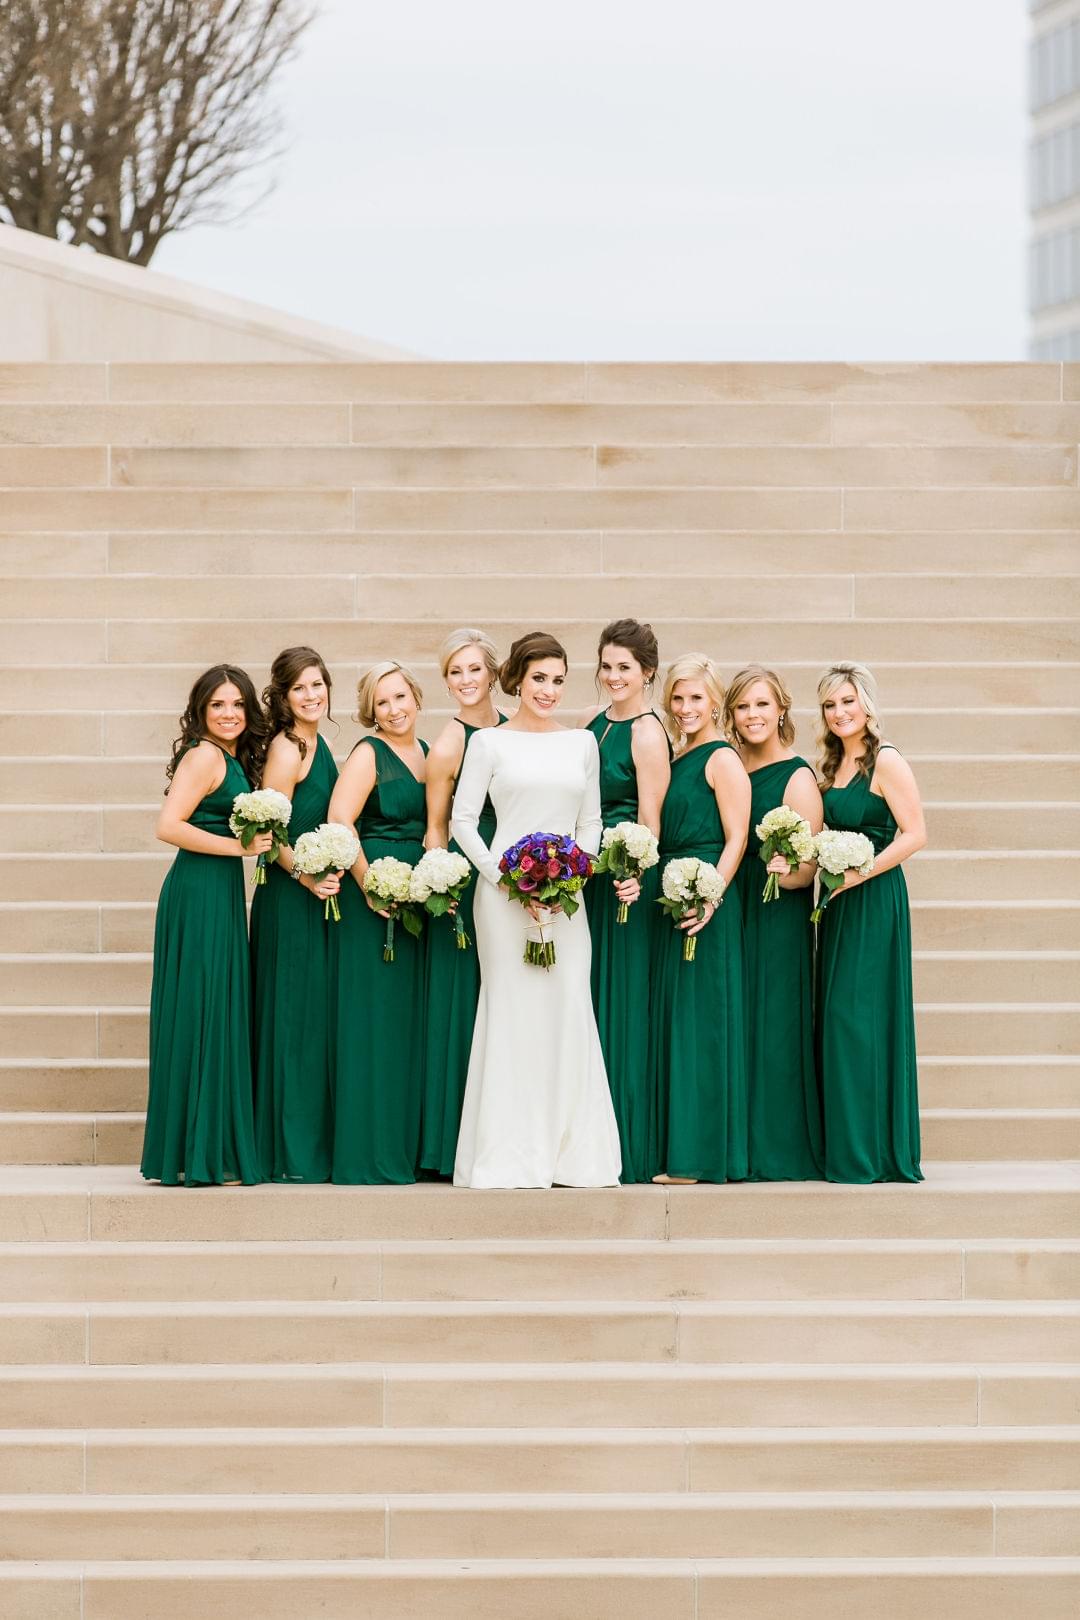 12 Gorgeous Emerald Green Bridesmaid Dress photos that will show you why this is the fanciest green shade for your wedding. Photo: Catherine Rhodes Photography.⠀⠀⠀⠀⠀⠀⠀⠀⠀ ⠀⠀⠀⠀⠀⠀⠀⠀⠀⠀⠀⠀⠀⠀⠀⠀⠀⠀⠀⠀⠀⠀⠀ ❤️⠀More #BridesmaidDresses inspiration: mysweetengagement.com/galleries/bridesmaids⠀⠀ ❤️⠀More #EmeraldGreen #wedding inspiration on our Wedding Colors gallery: mysweetengagement.com/colors/emerald-green-wedding/